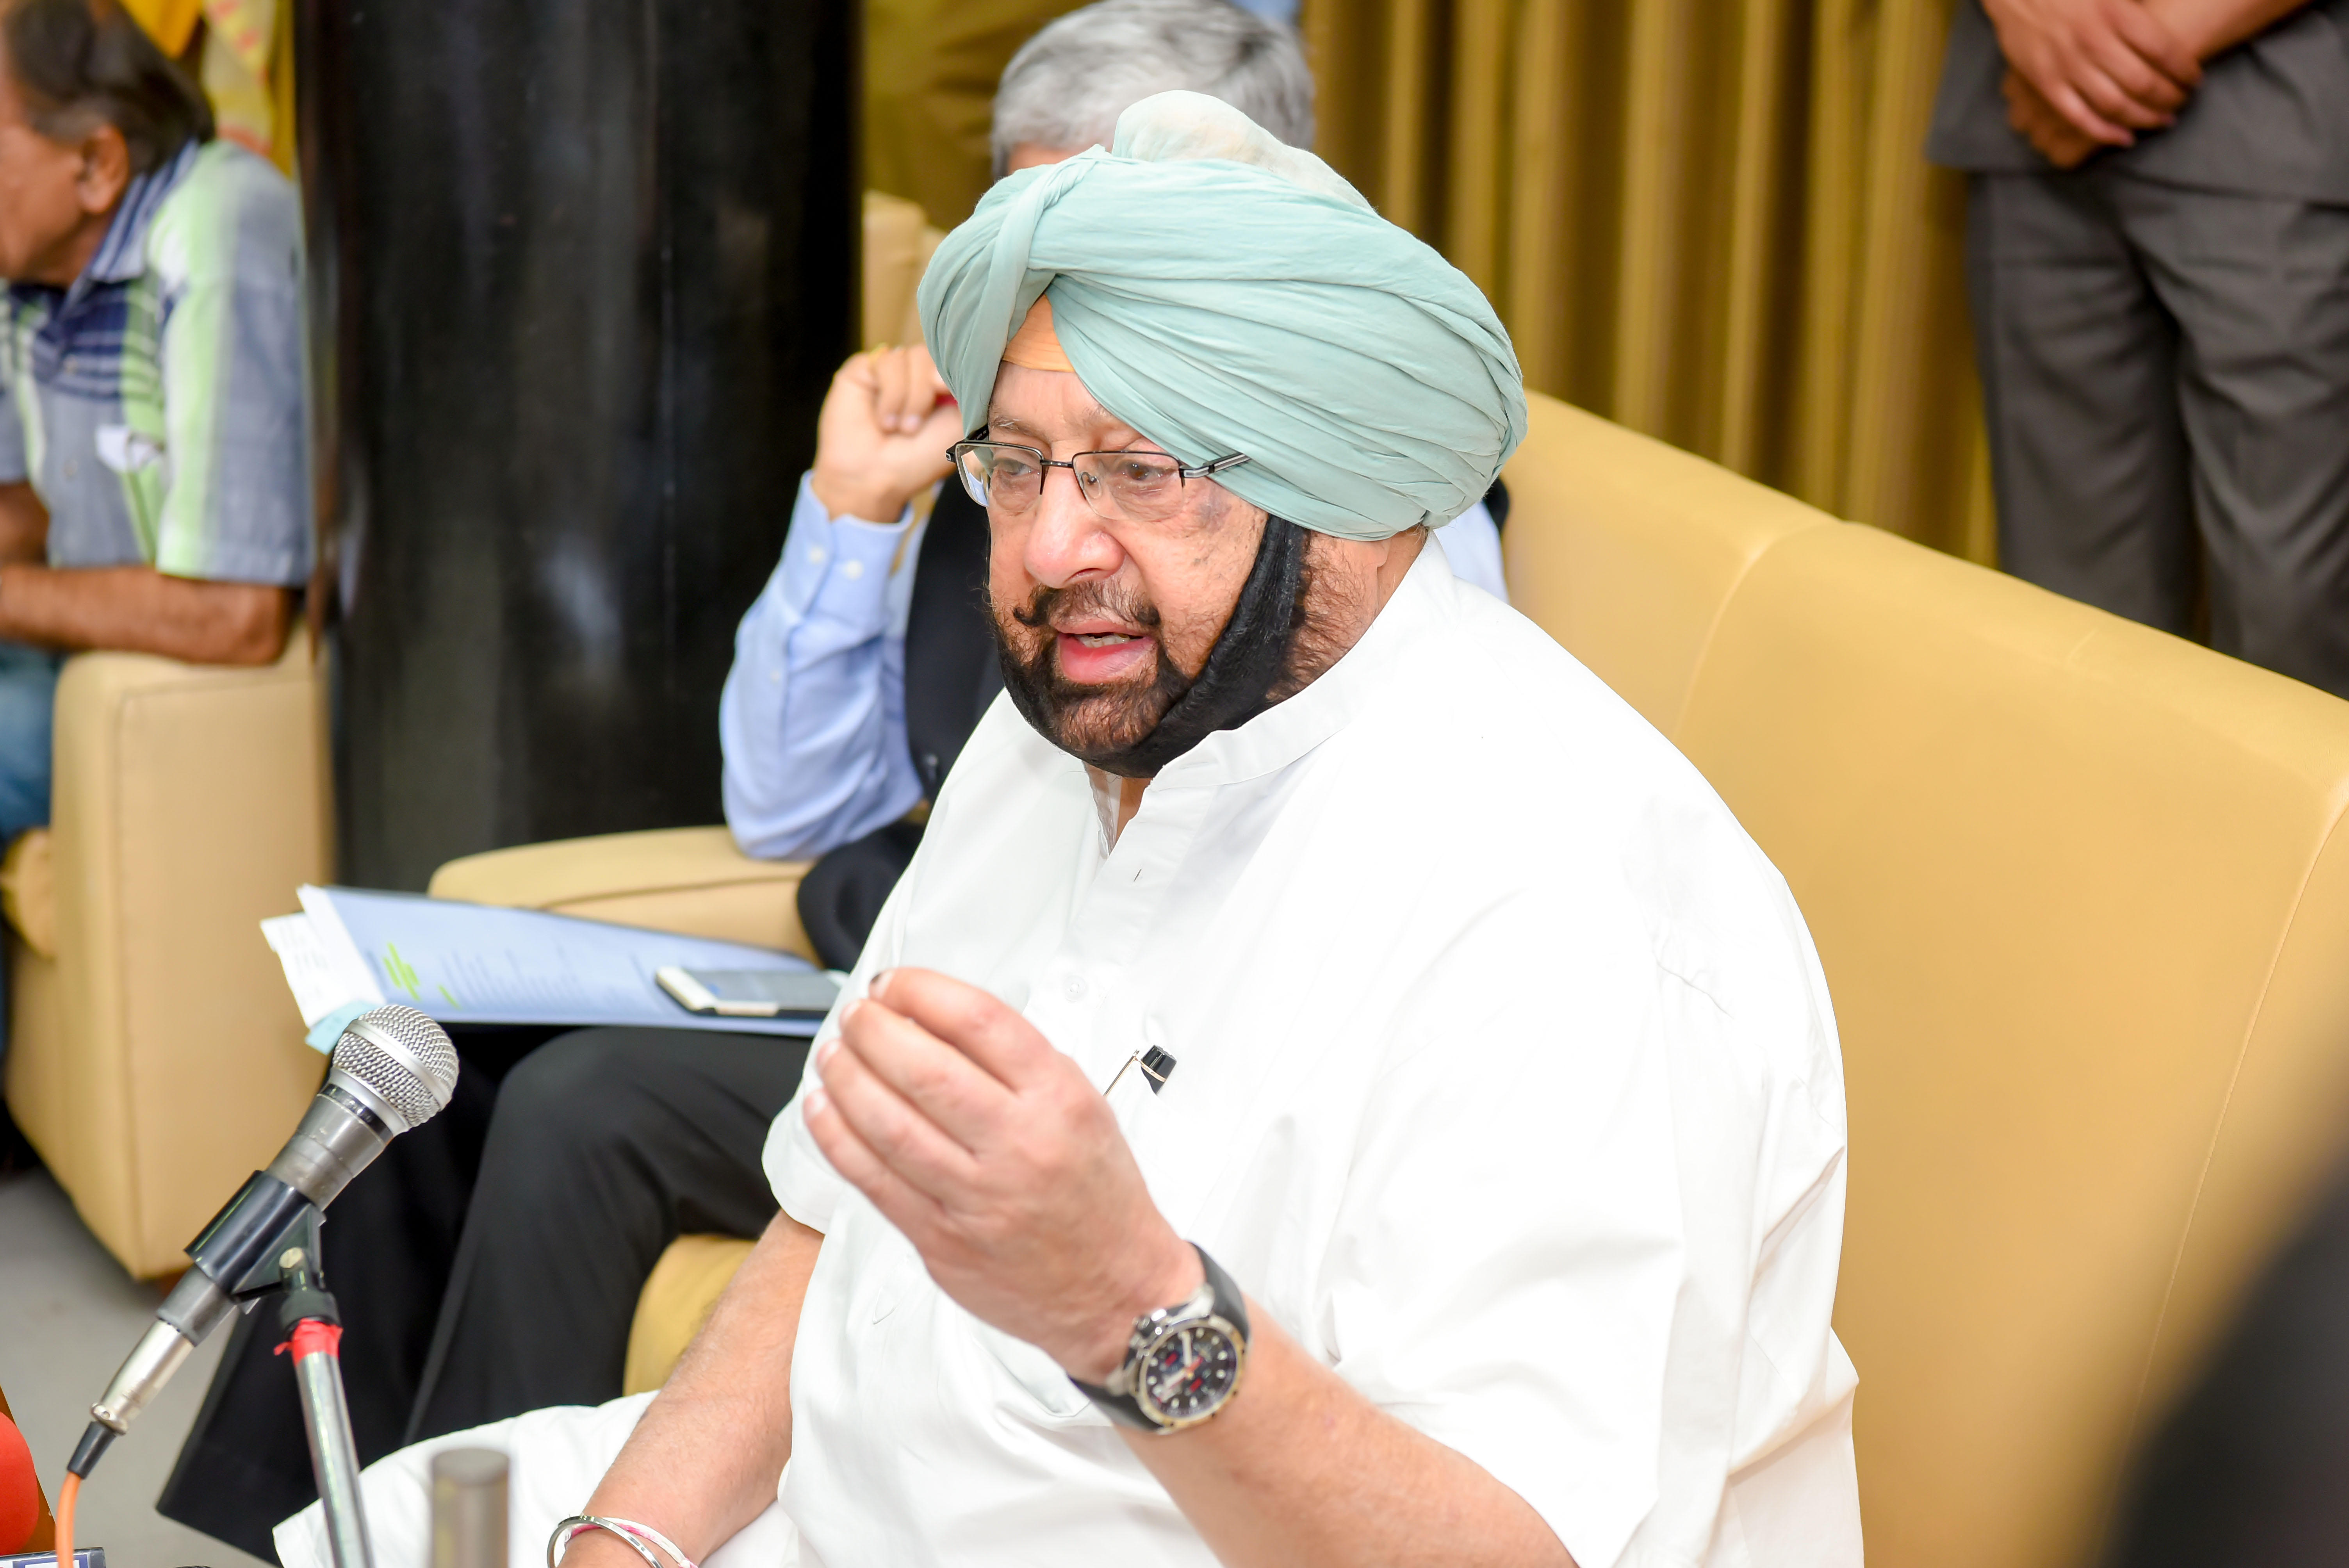 Punjab CM orders review of arms, ammunition licenses in state to check violence, lawlessness